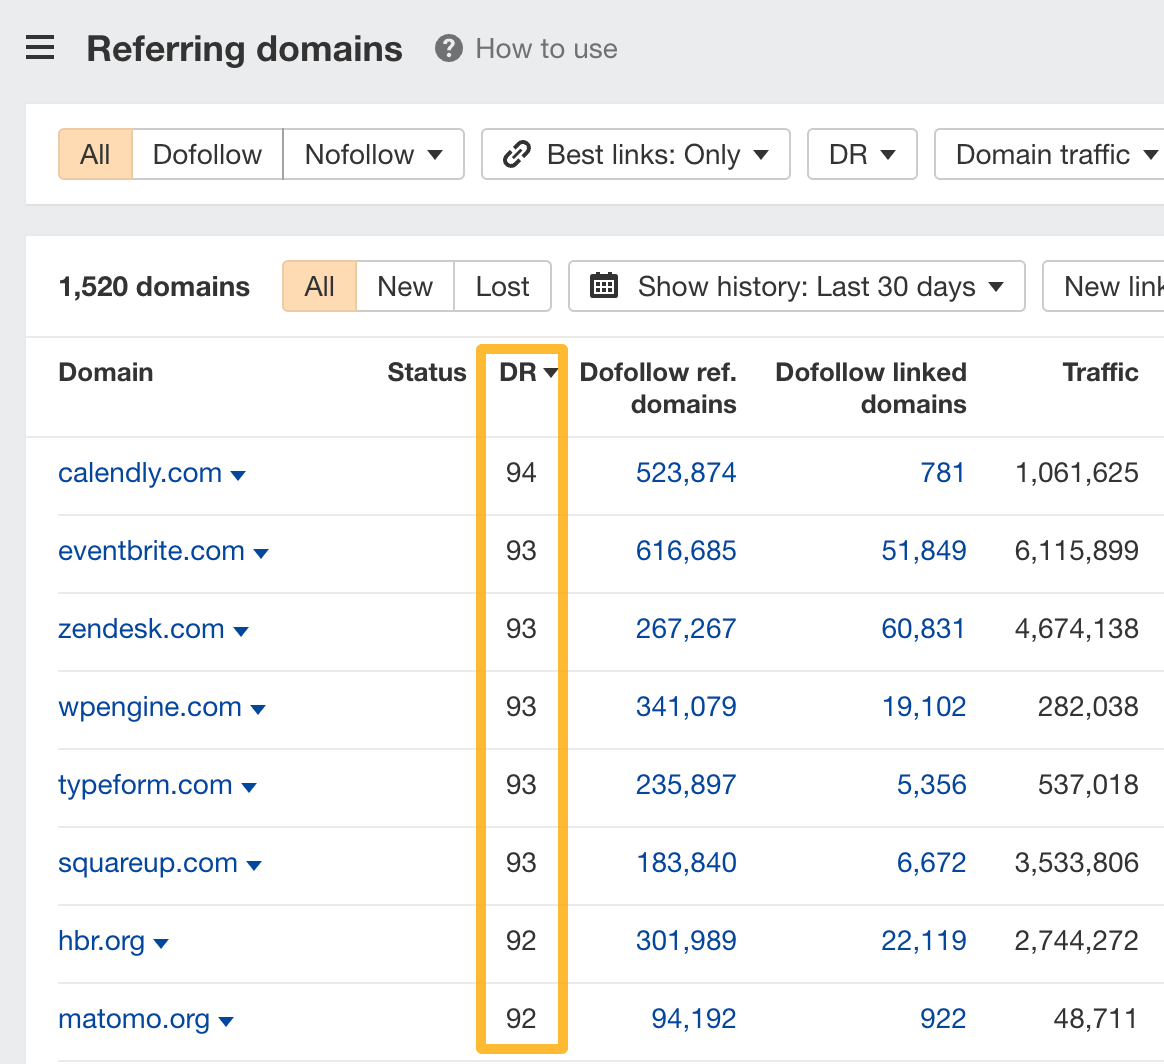 Referring domains report. 